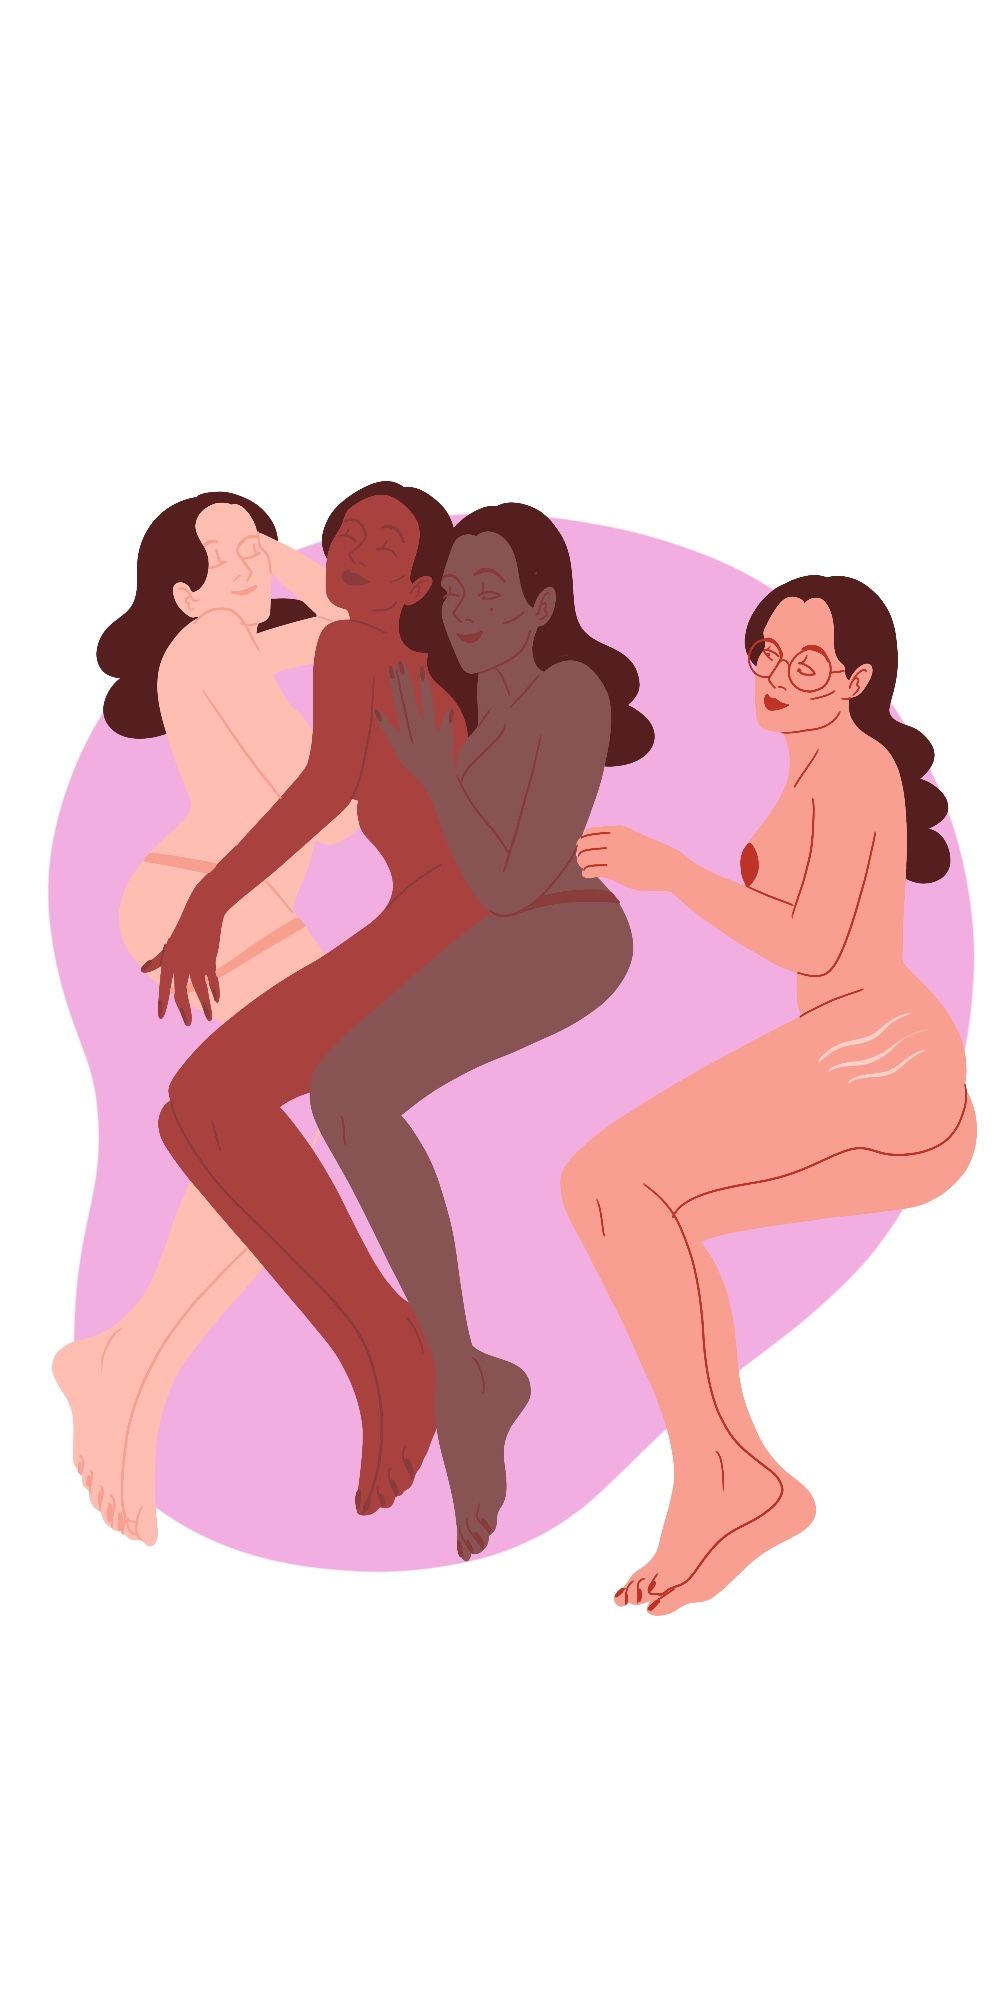 8 Foursome Sex Positions pic